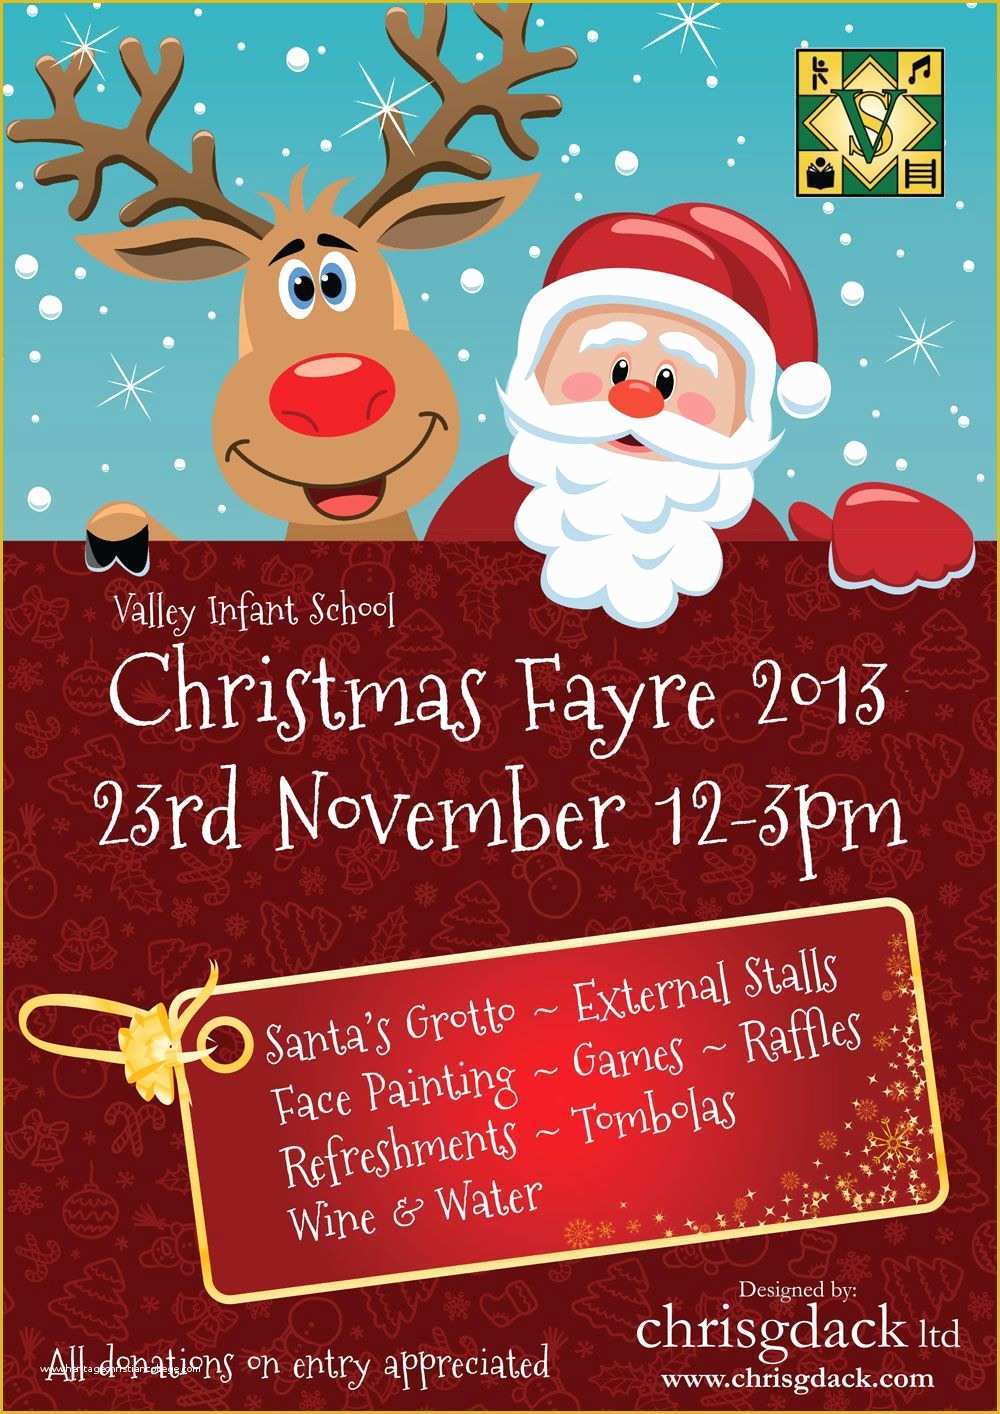 Craft Fair Poster Template Free Of Poster Designed for Valley Infant School S Christmas Fayre